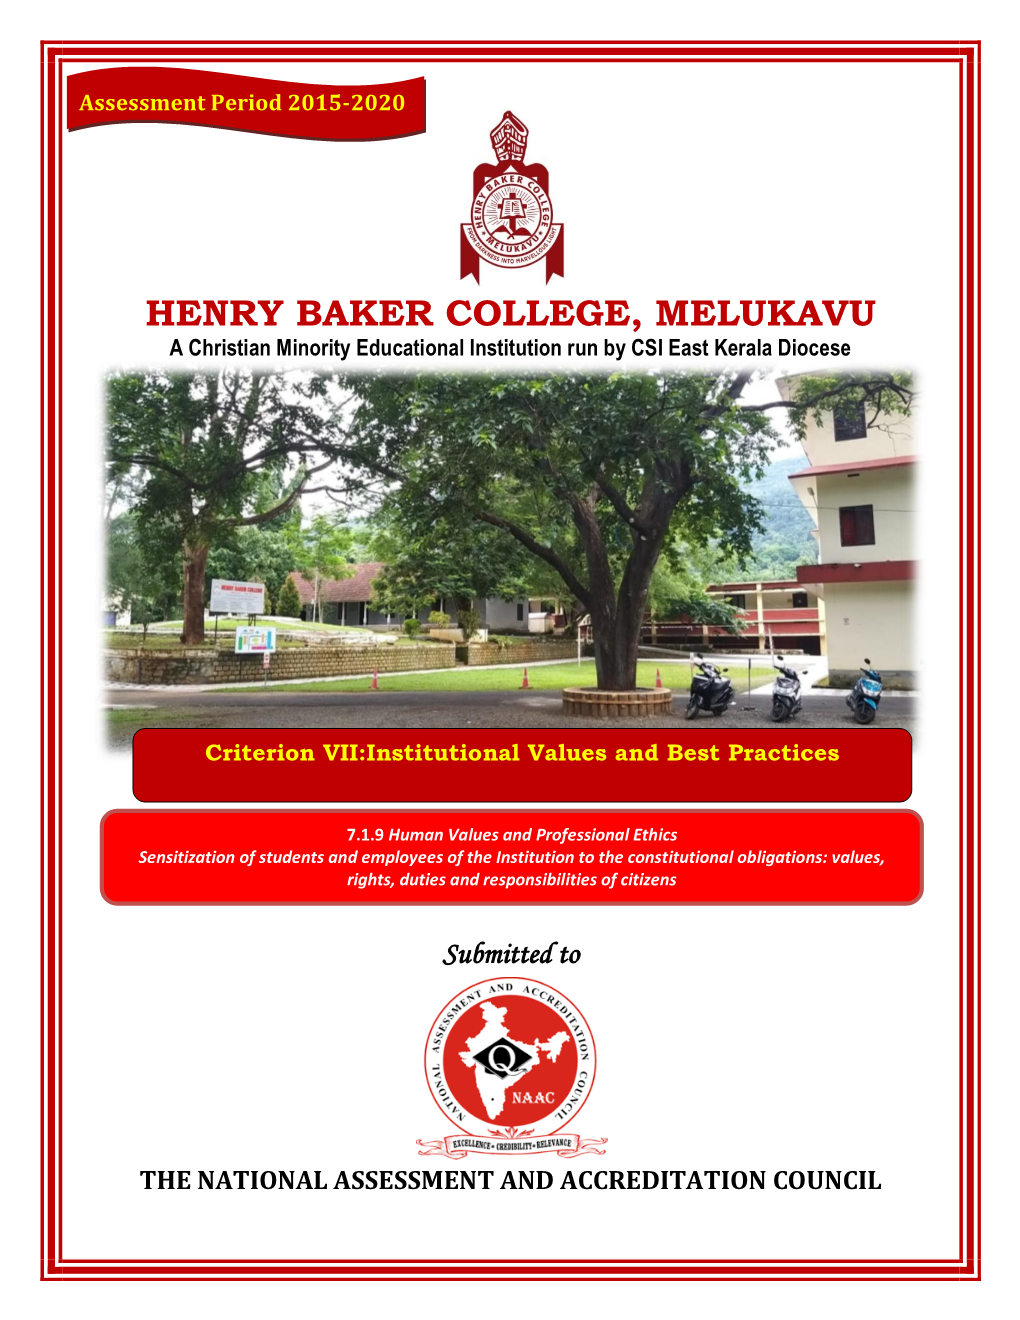 HENRY BAKER COLLEGE, MELUKAVU a Christian Minority Educational Institution Run by CSI East Kerala Diocese